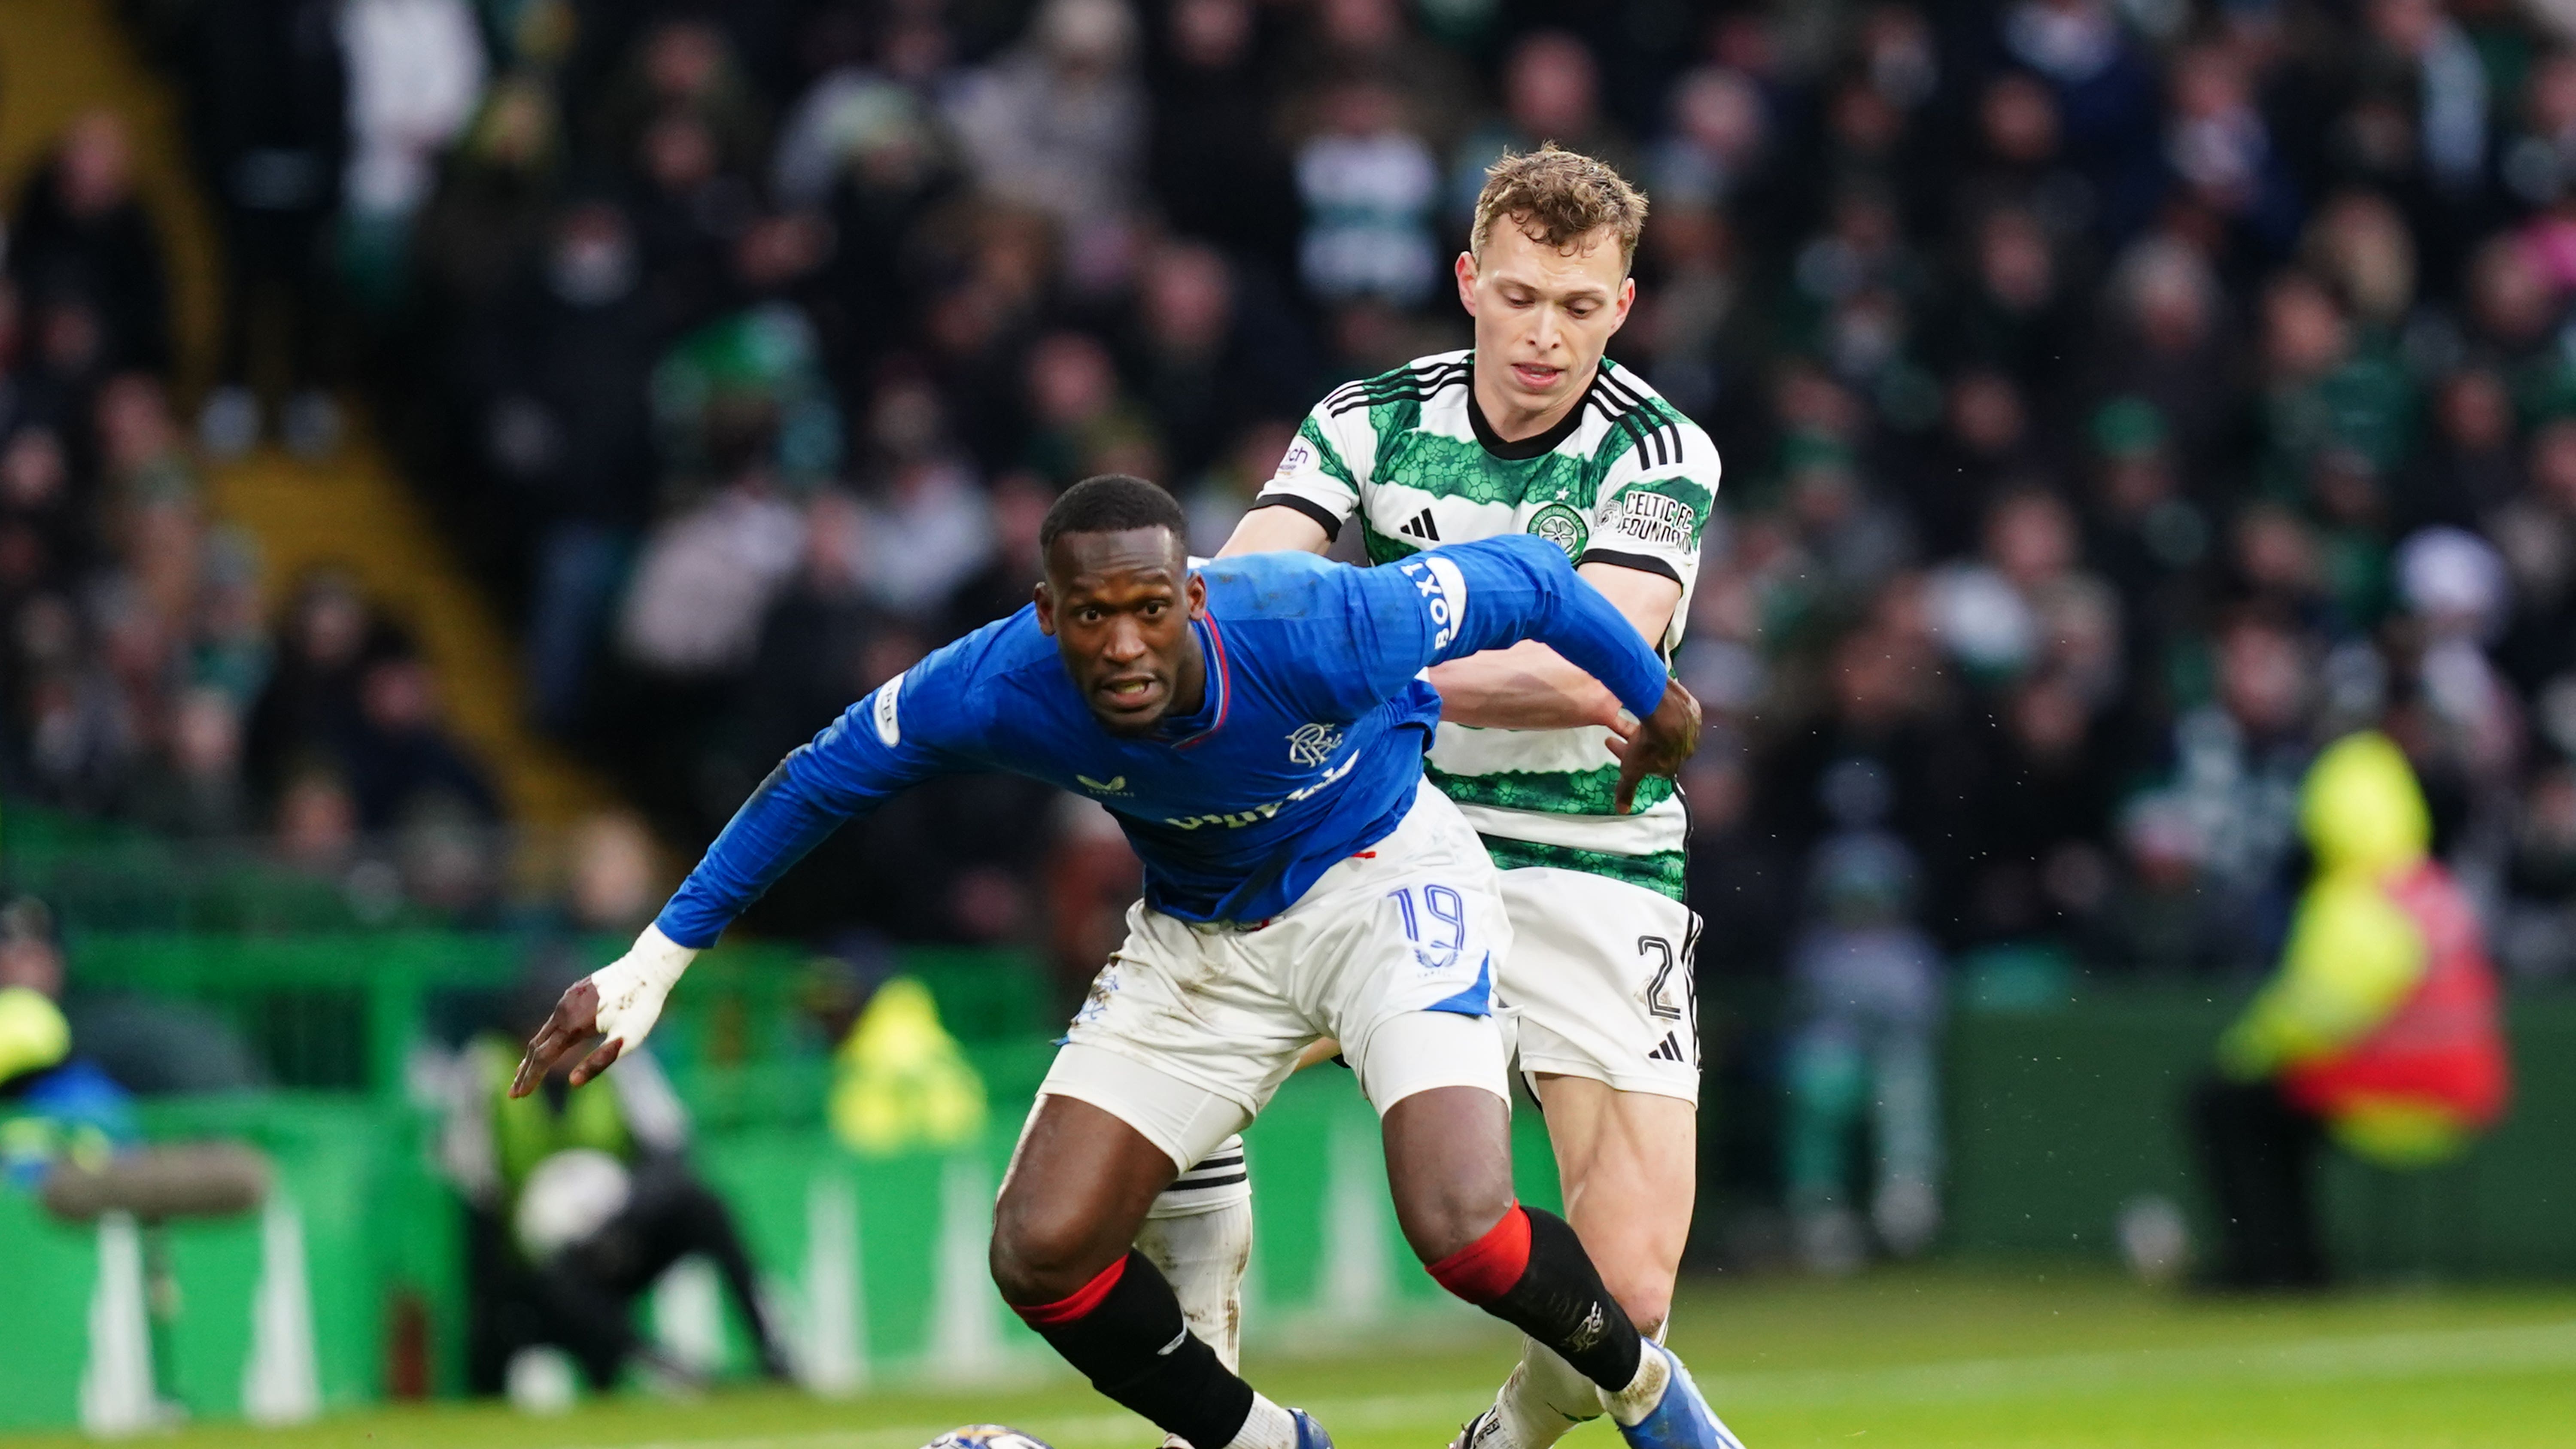 Rangers ask Scottish FA to release audio of VAR penalty decision in Celtic loss